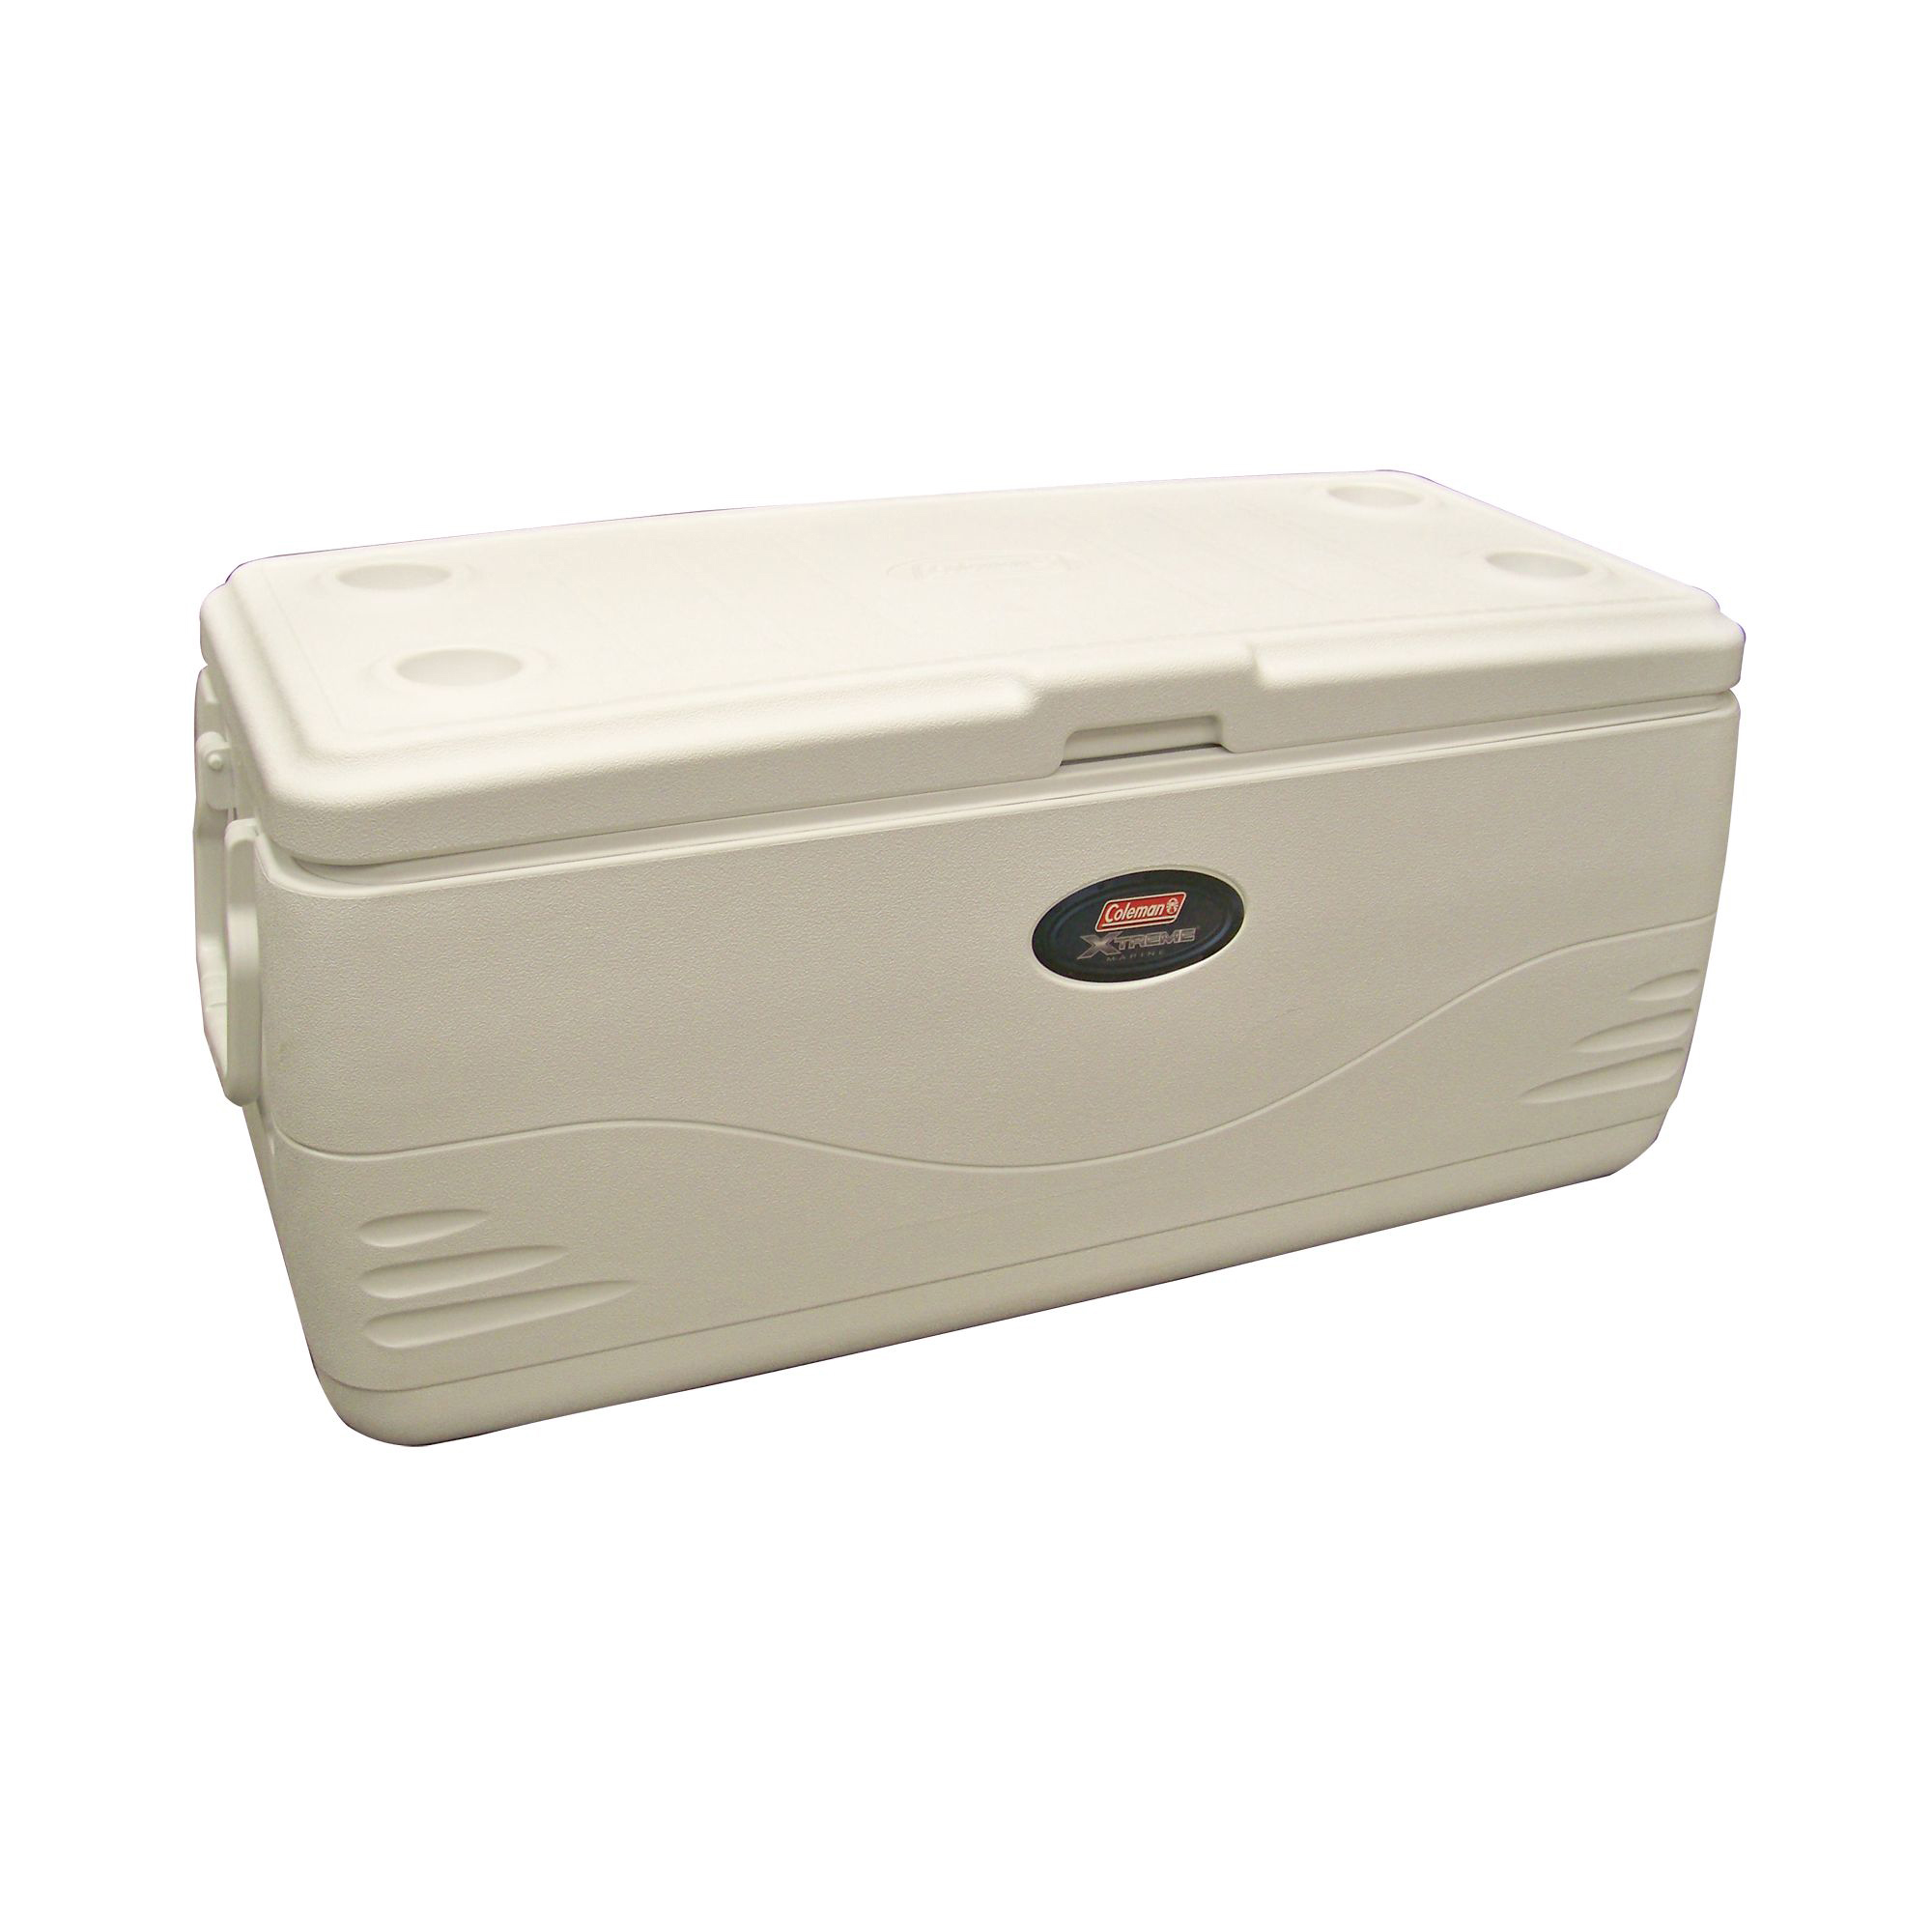 Coleman 150 qt. Marine Hard Sided Ice Chest Cooler, White - image 2 of 2